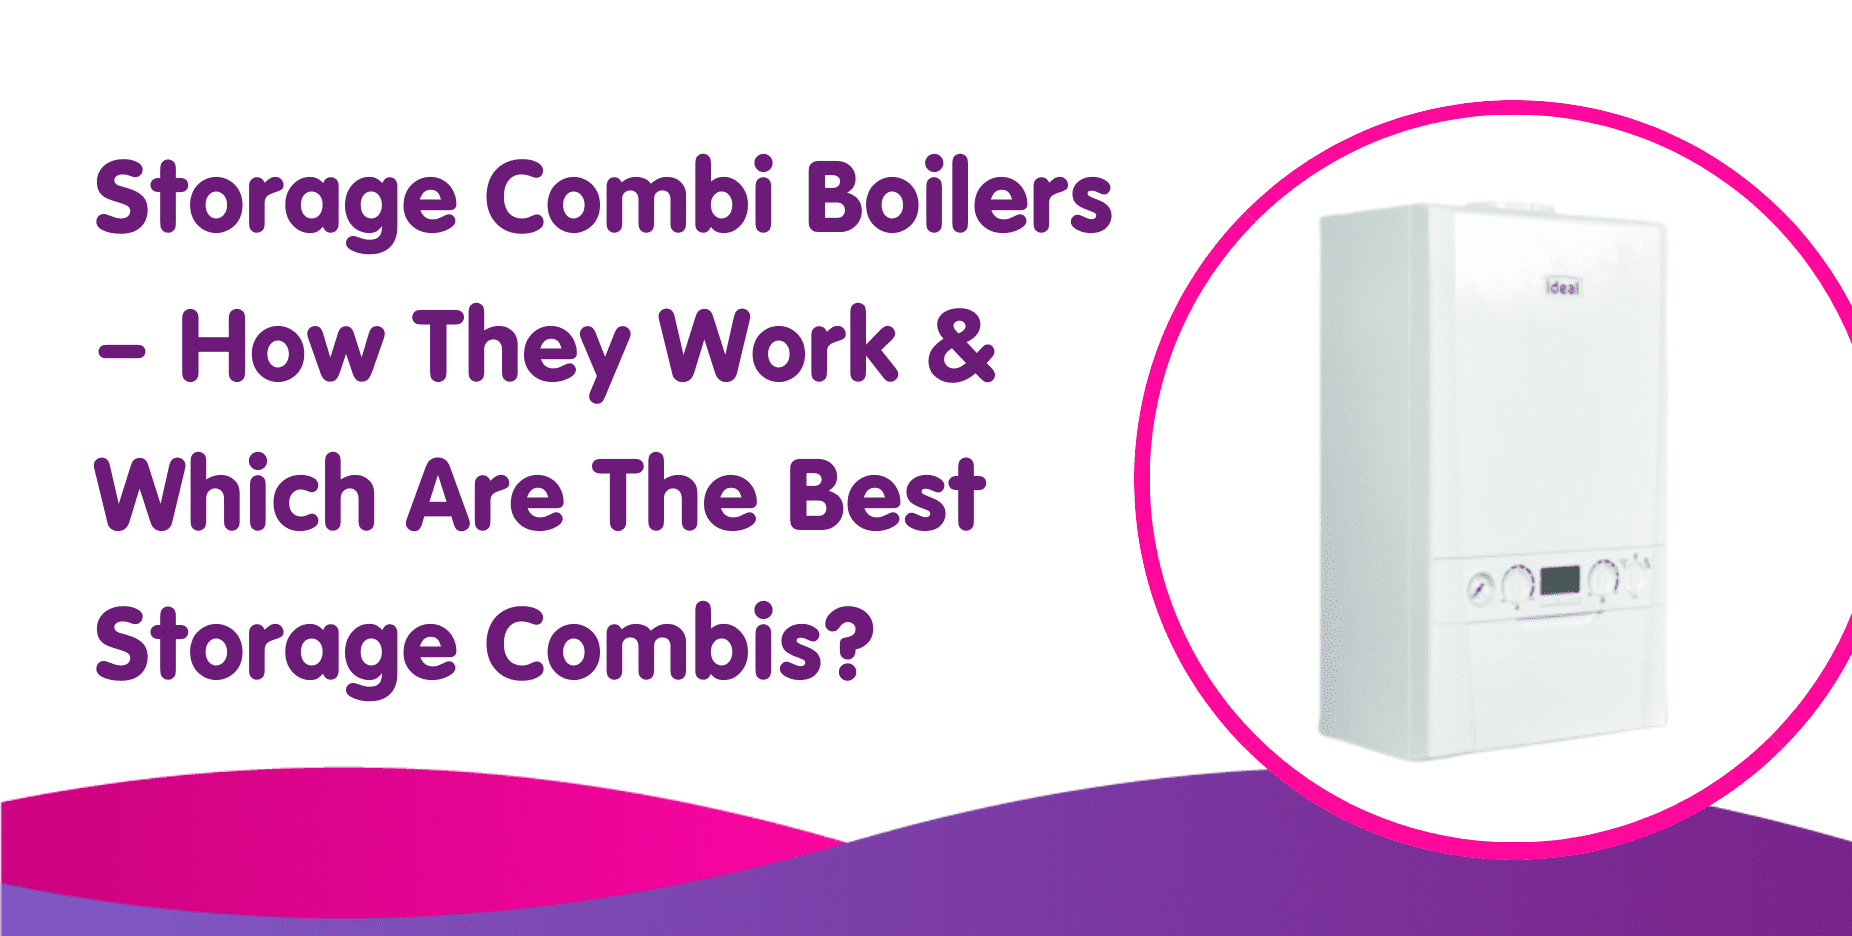 Storage Combi Boilers – How They Work & Which Are The Best Storage Combis